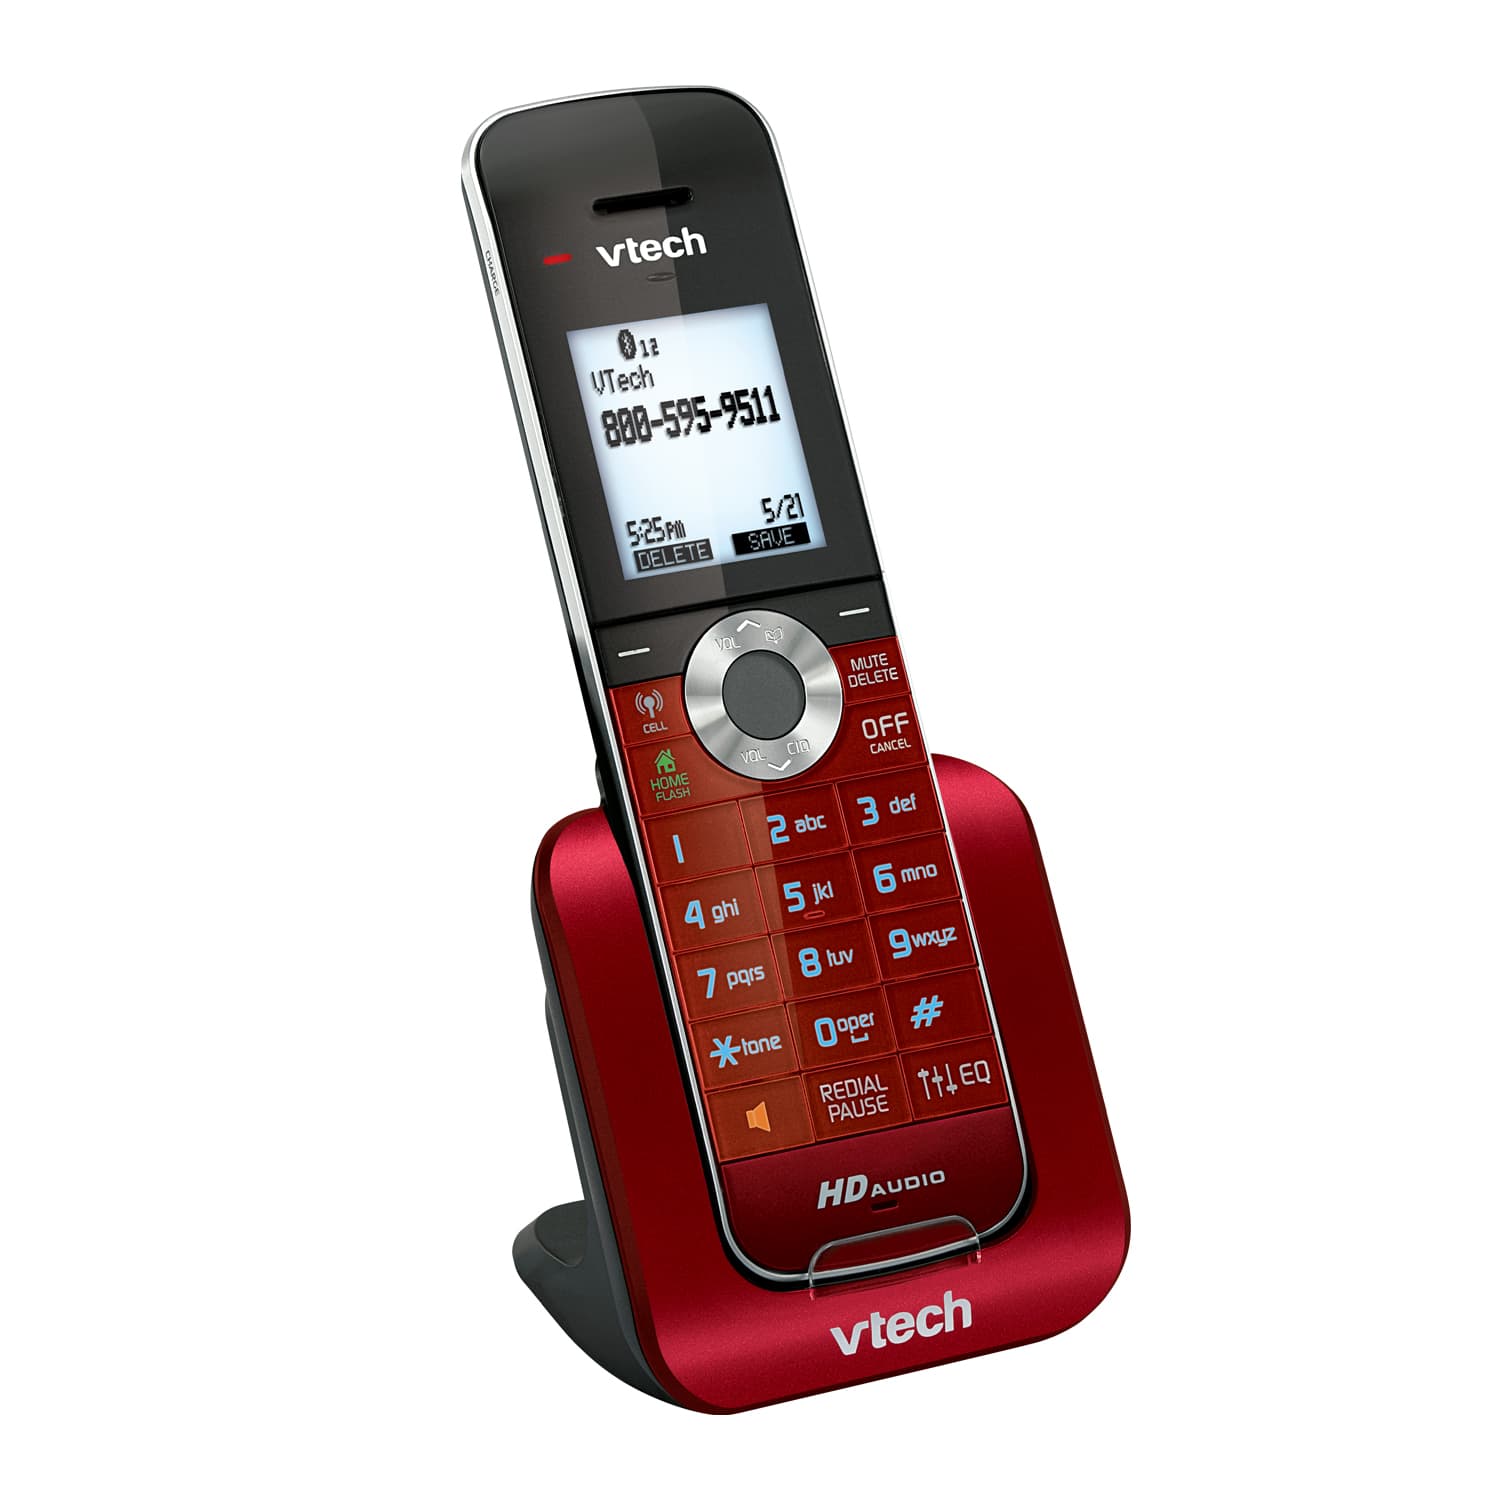 5 Handset Connect to Cell™ Phone System with Cordless Headset - view 5